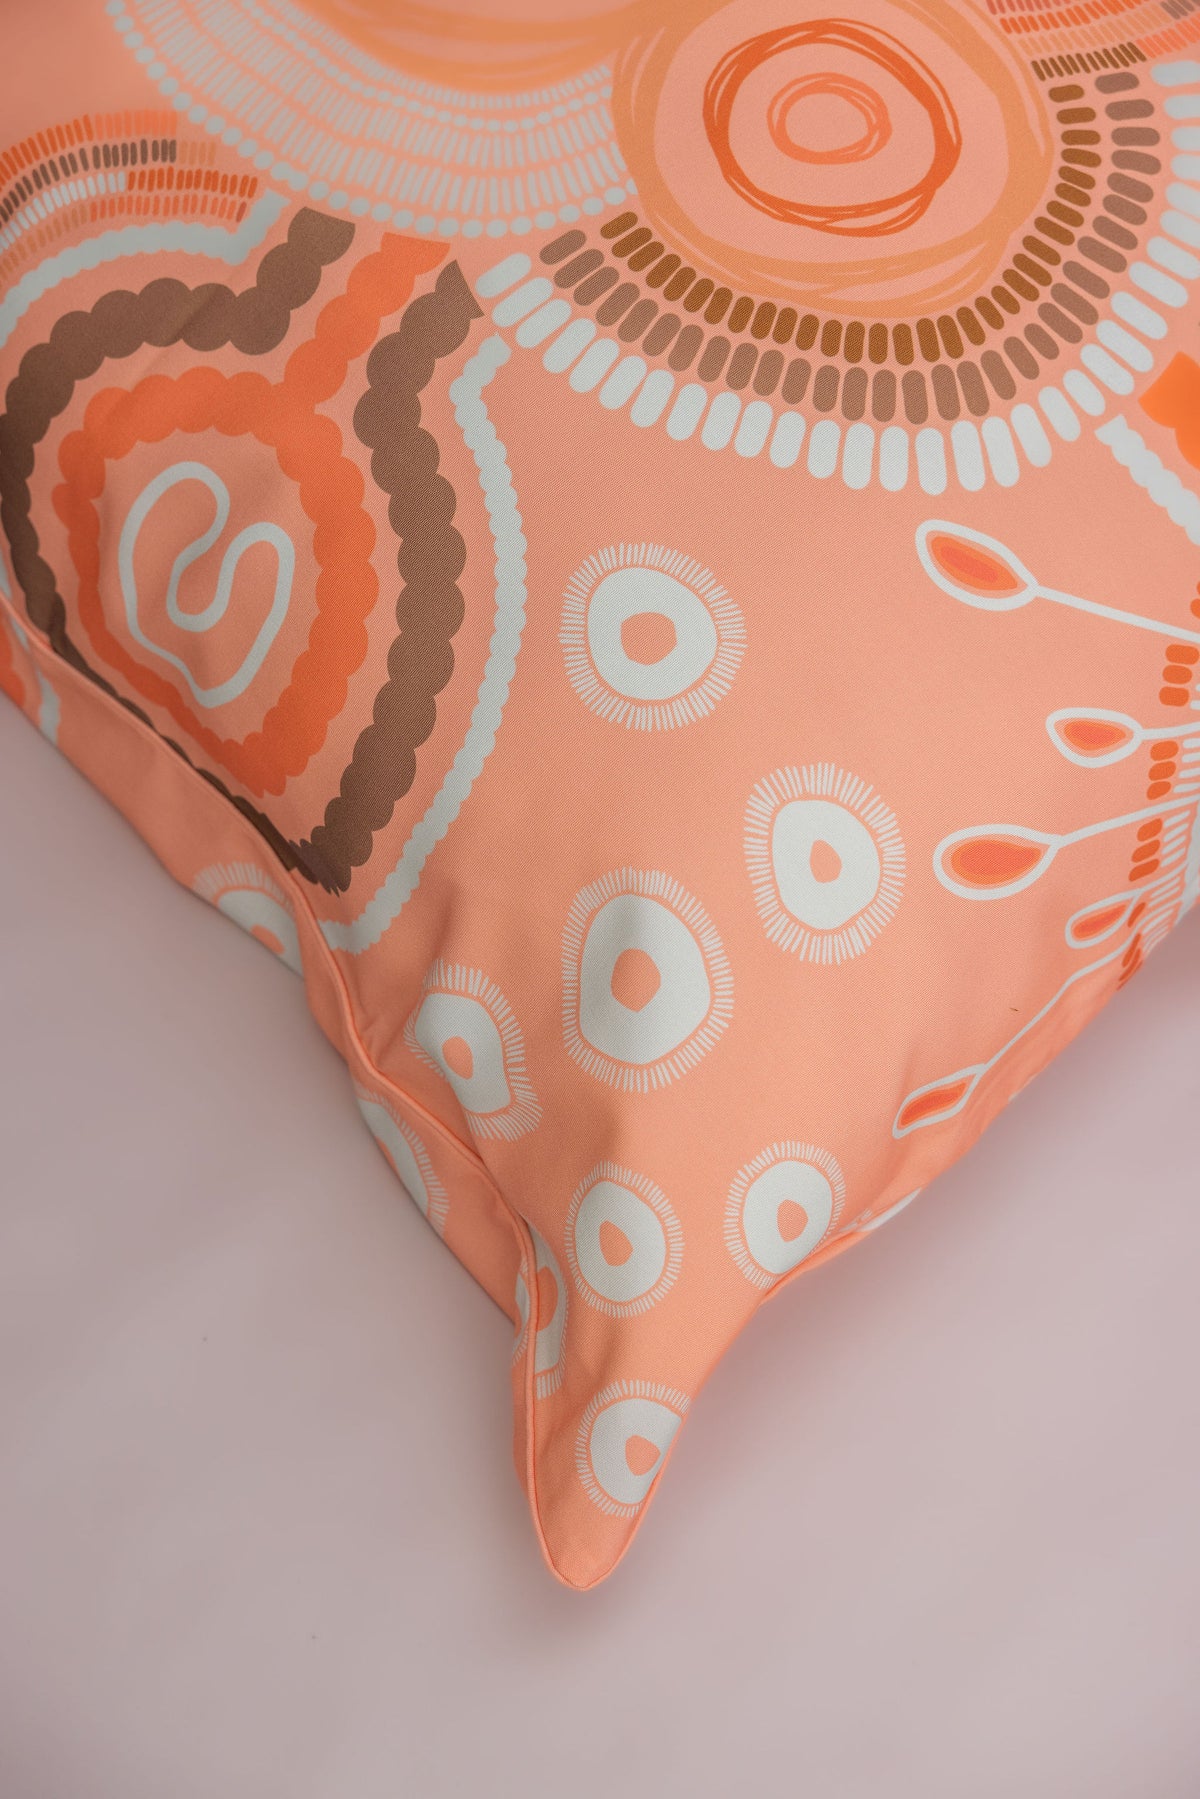 Lilly Pilly Float Outdoor cushion cover